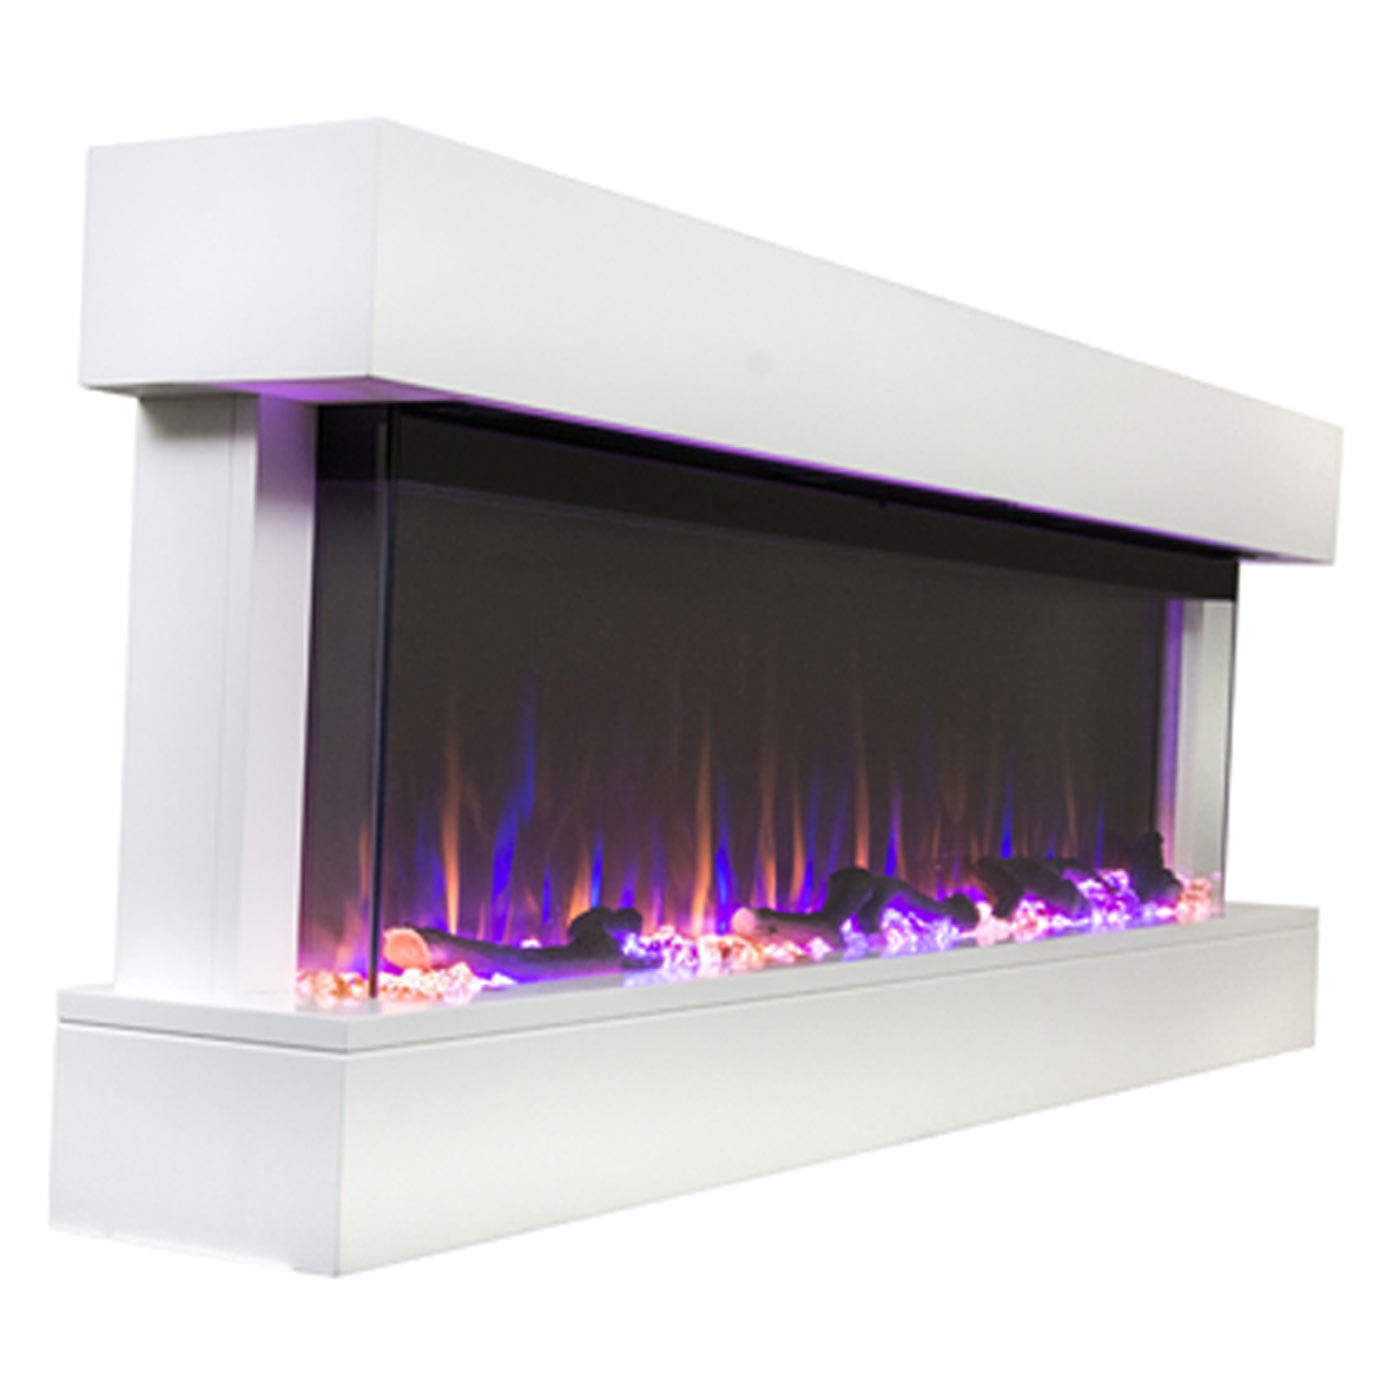 Chesmont White 50 inch 80033 Wall Mount 3-Sided Smart Electric Fireplace shown up close at an angle.